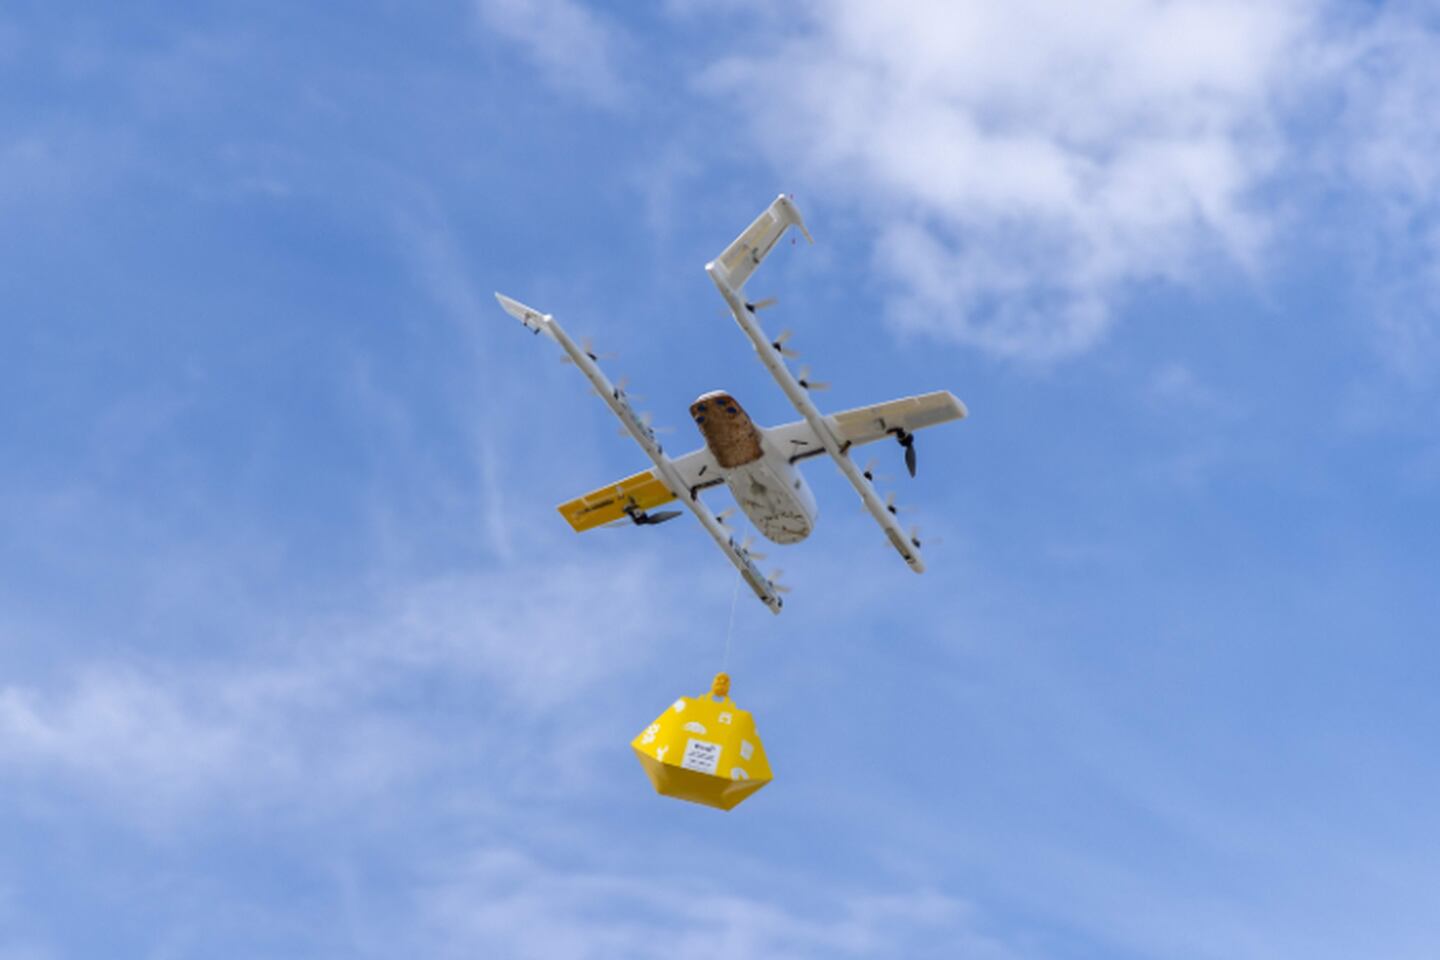 Get your stuff faster with on-demand drone delivery app